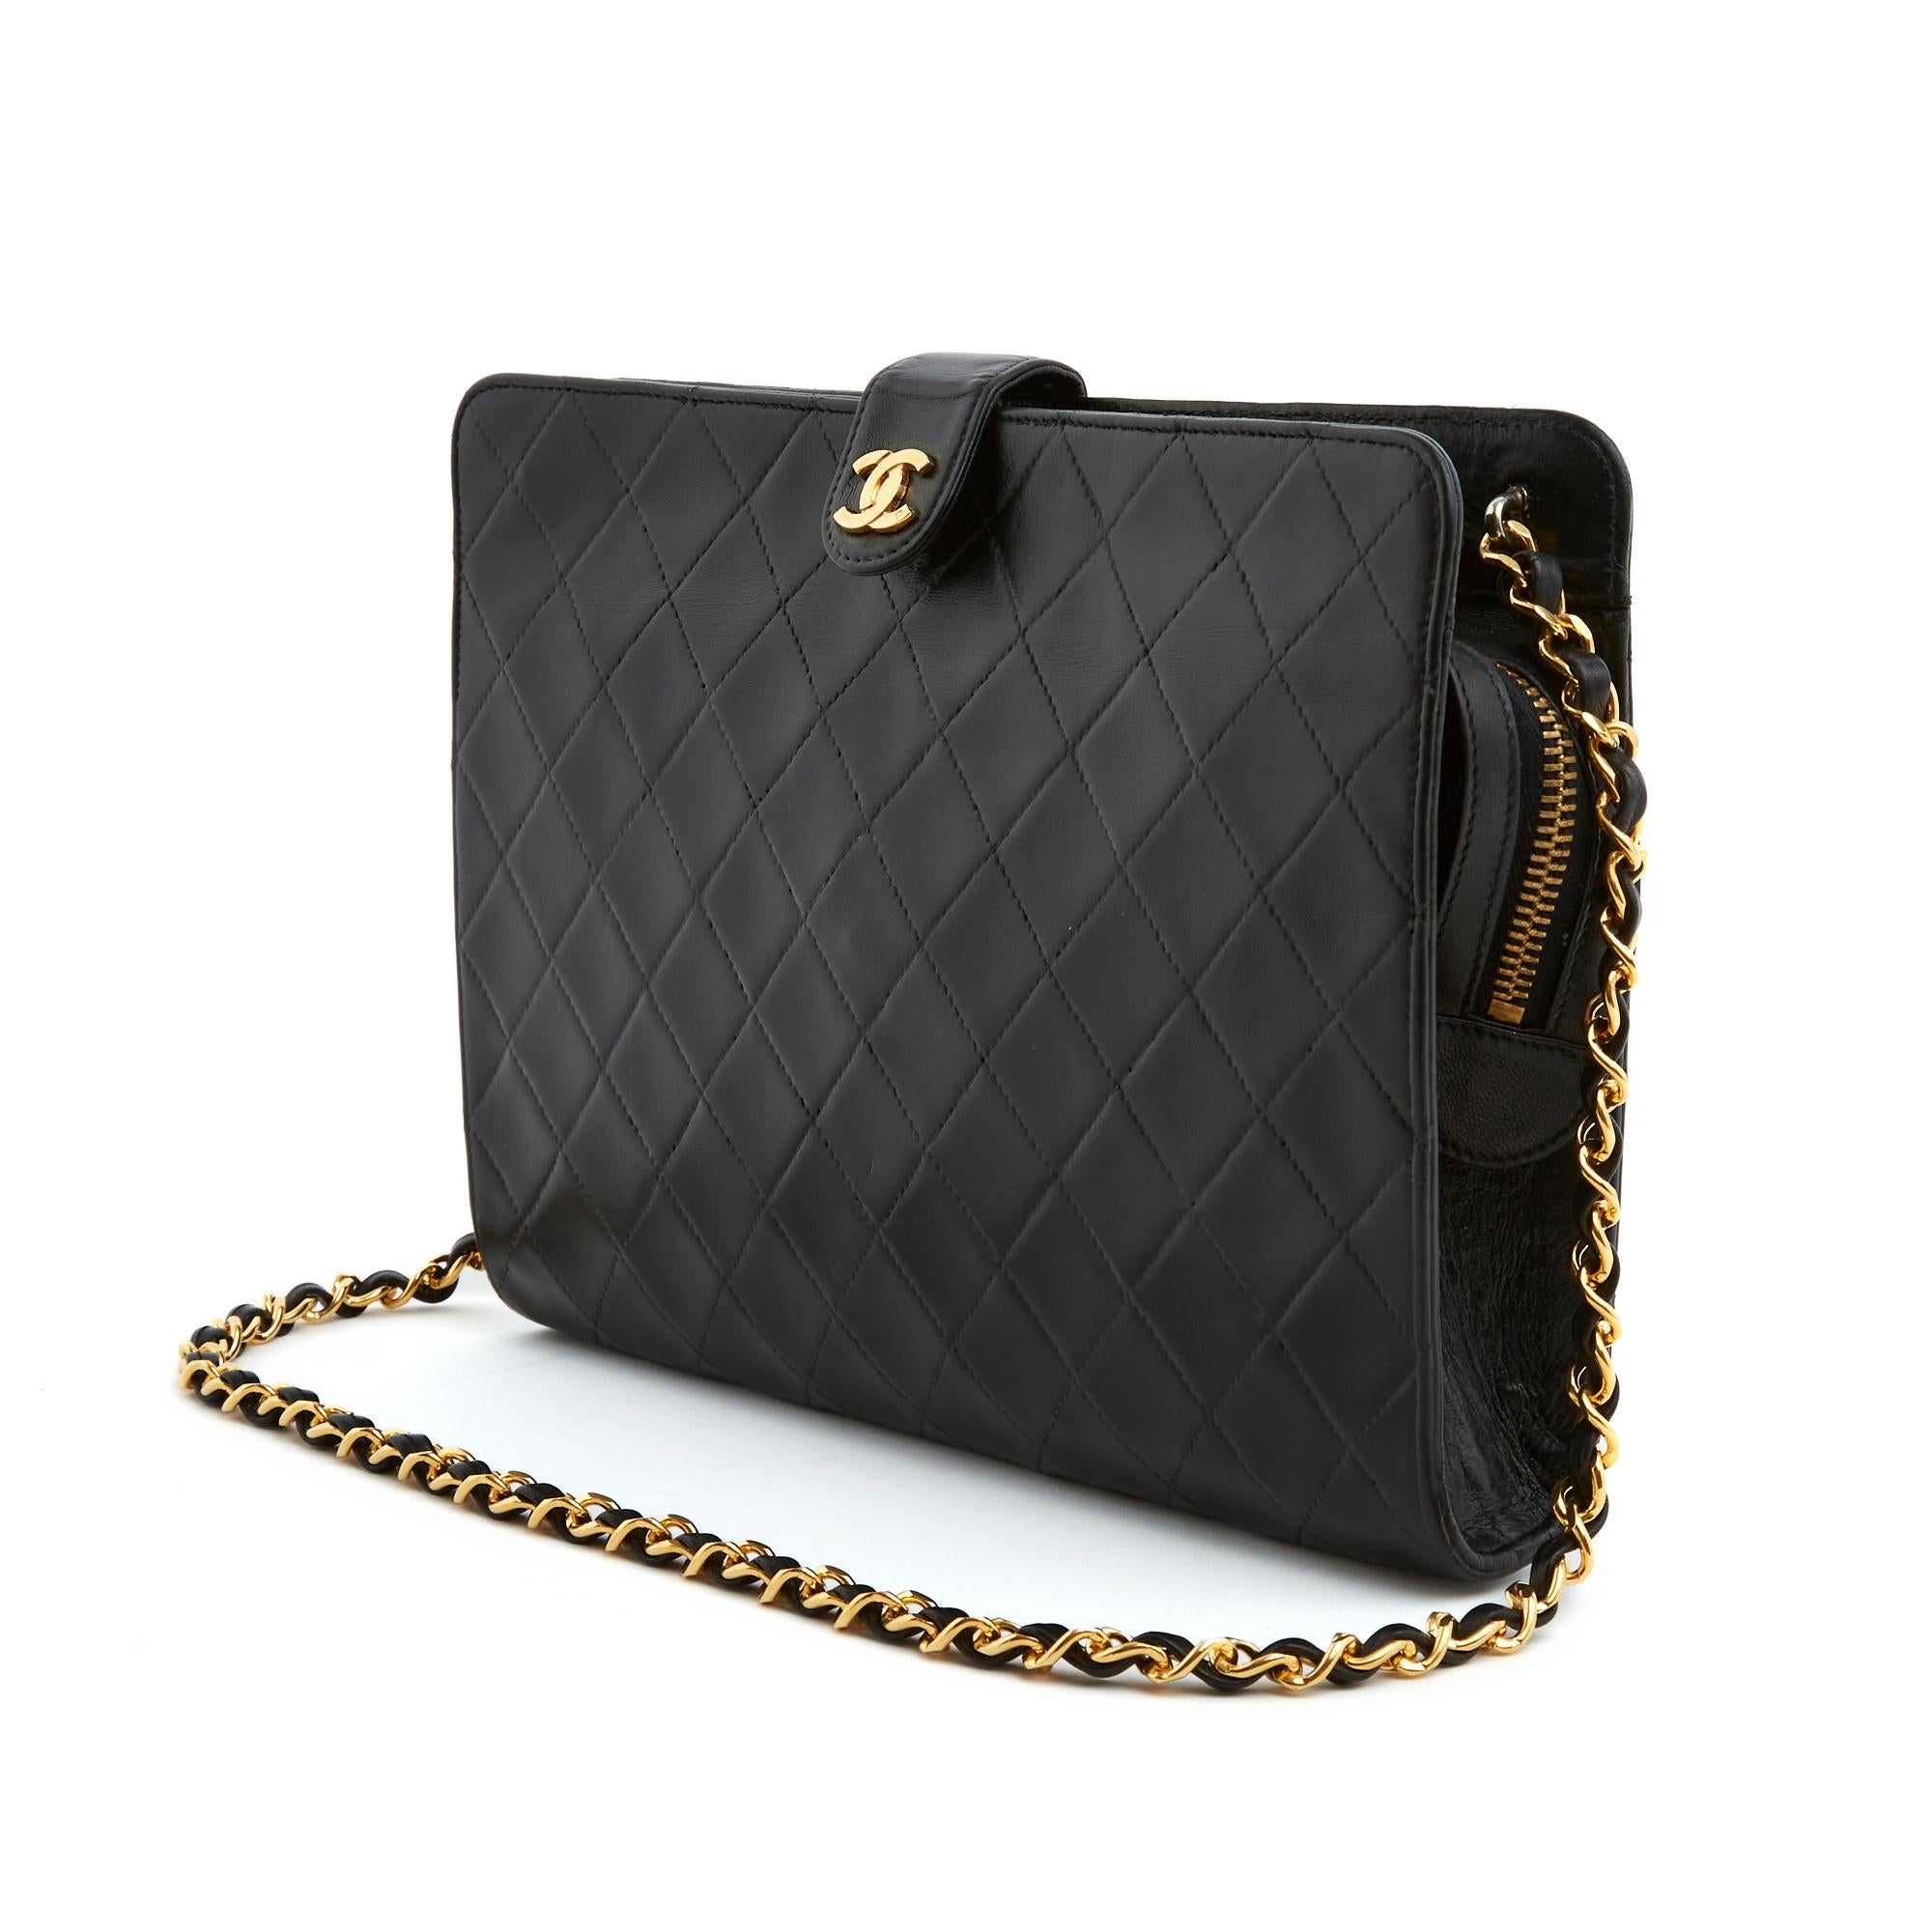 Chanel bag from the Timeless or Classic series, probably Haute Couture, clutch style in quilted black leather, black canvas interior with a zipped pocket, zip closure with CC logo puller in gold metal, leather snap tab decorated with the CC logo,